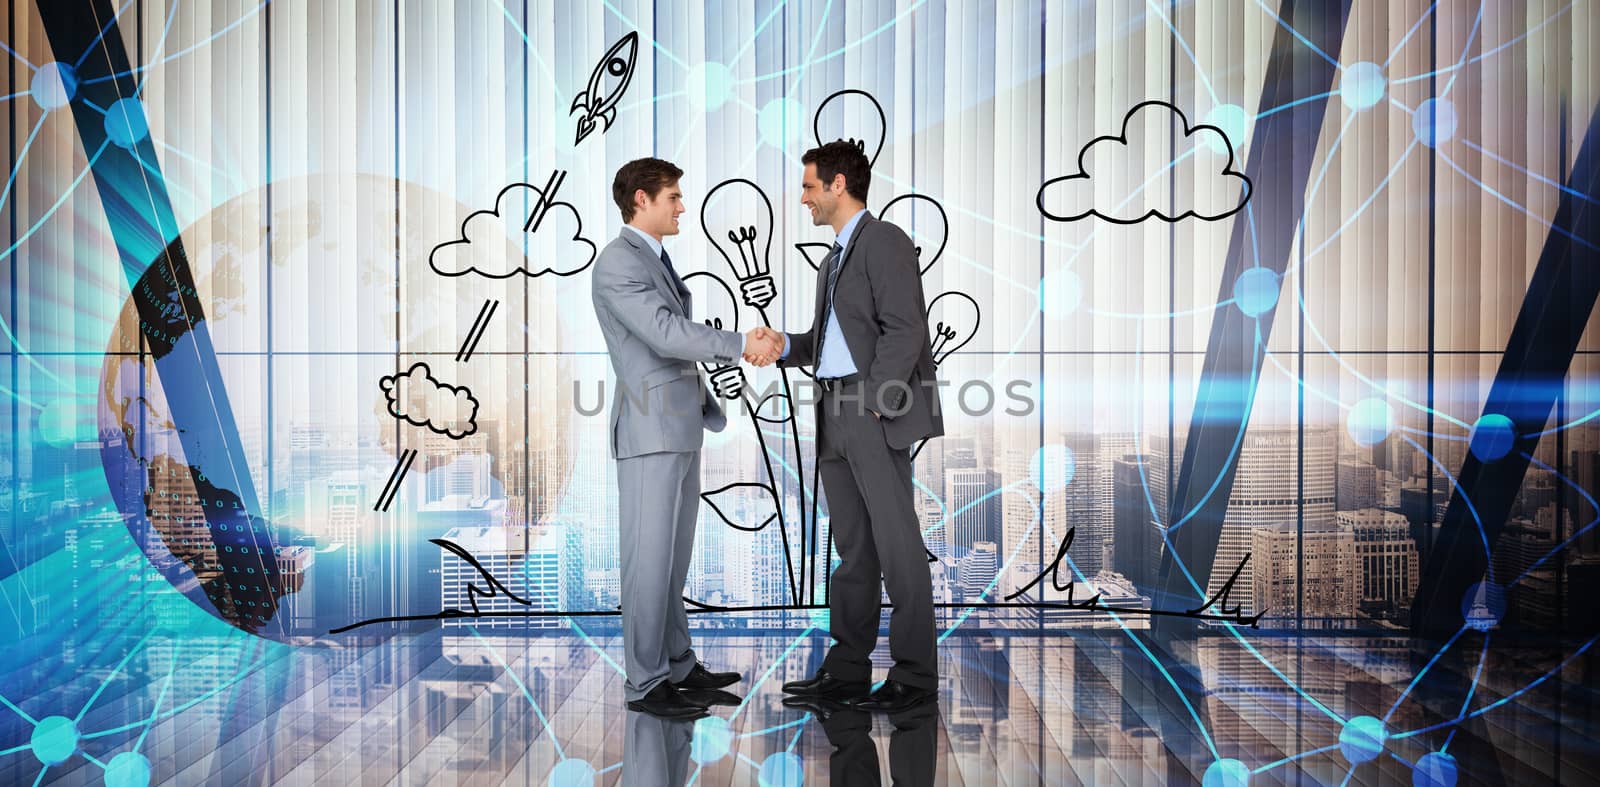 Businessmen shaking hands against room with large window looking on city